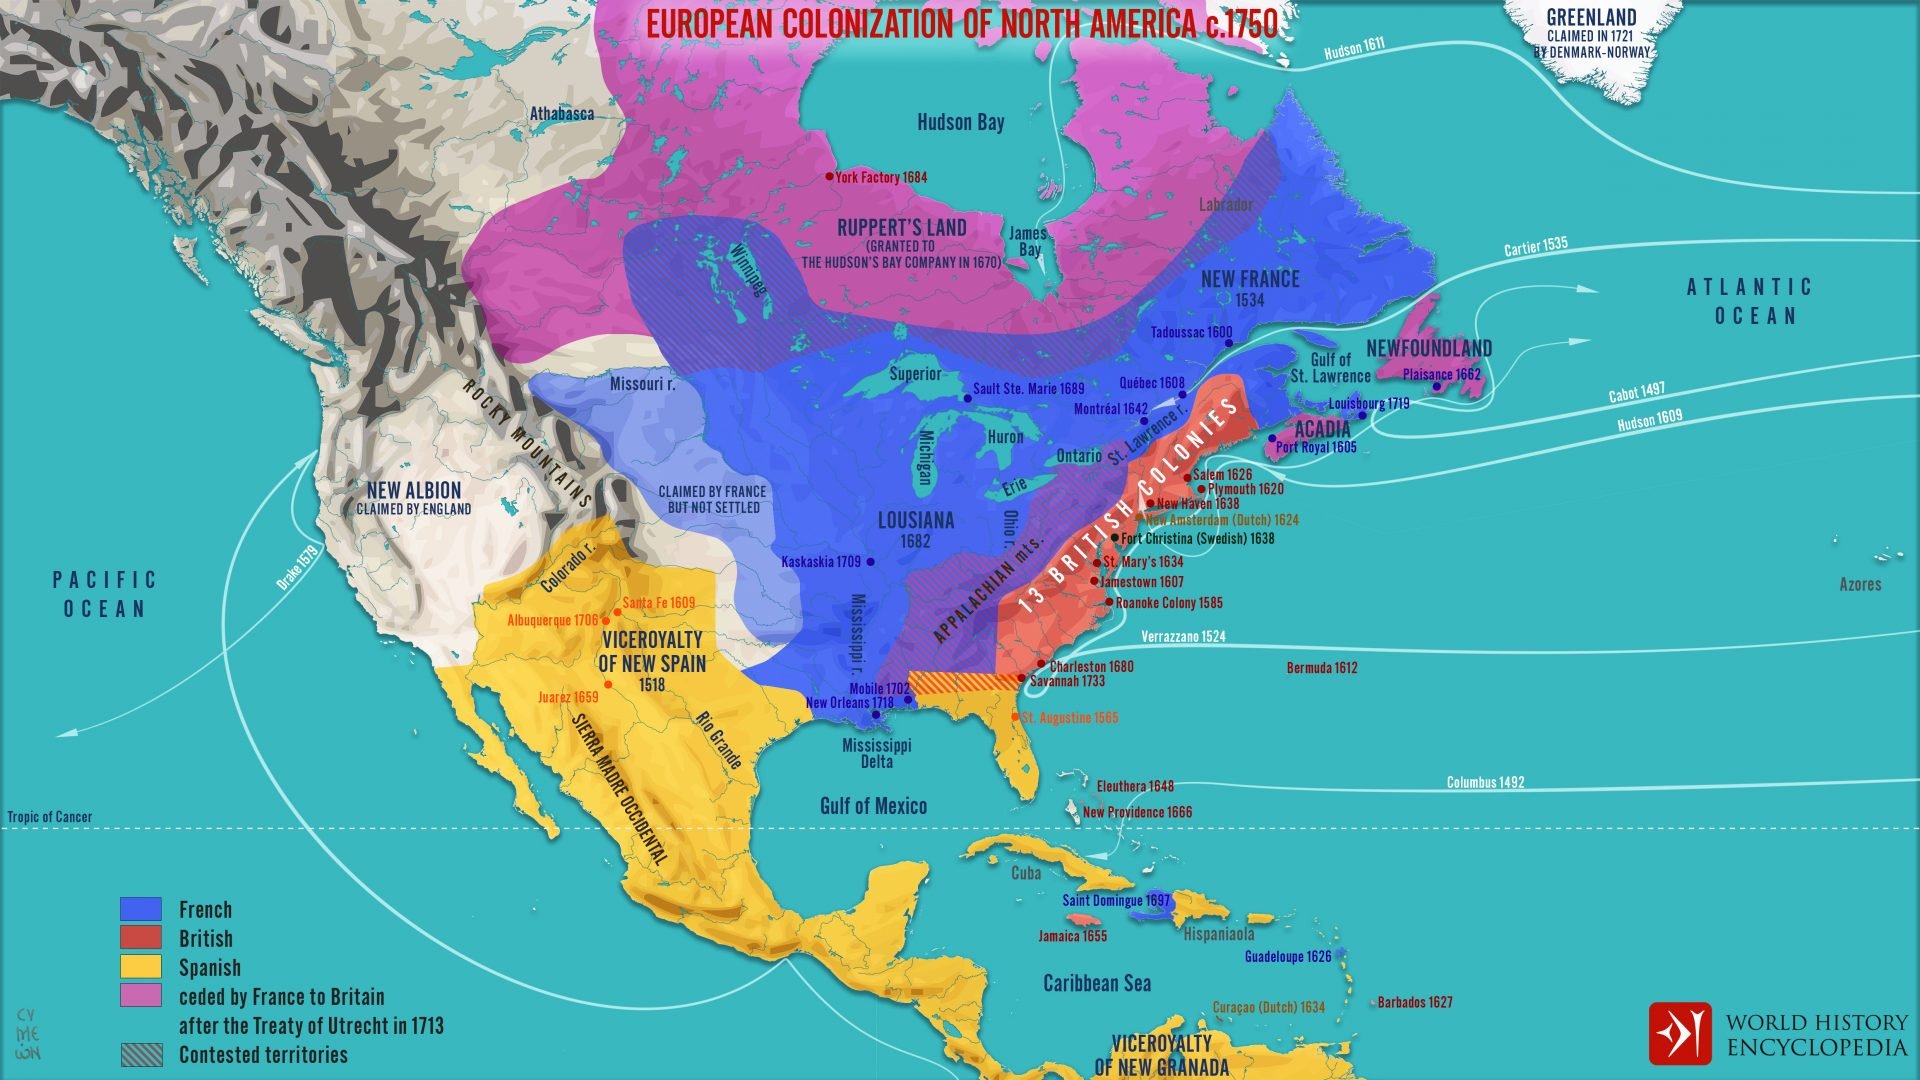 A detailed map depicting the European colonization of North America around the year 1750. It shows various territories marked in different colors to represent the colonial powers: purple for French territories, red for British, yellow for Spanish, and green for areas ceded by France to Britain after the Treaty of Utrecht in 1713. Contested territories are also indicated. The map includes notable settlements, dates of colonization, and geographical features such as rivers and mountain ranges. Key locations and historical claims, such as New France, Louisiana, the Viceroyalty of New Spain, and British colonies along the eastern coast, are clearly marked. Additionally, the map outlines the shifting power dynamics and territorial changes in the wake of the Treaty of Utrecht.